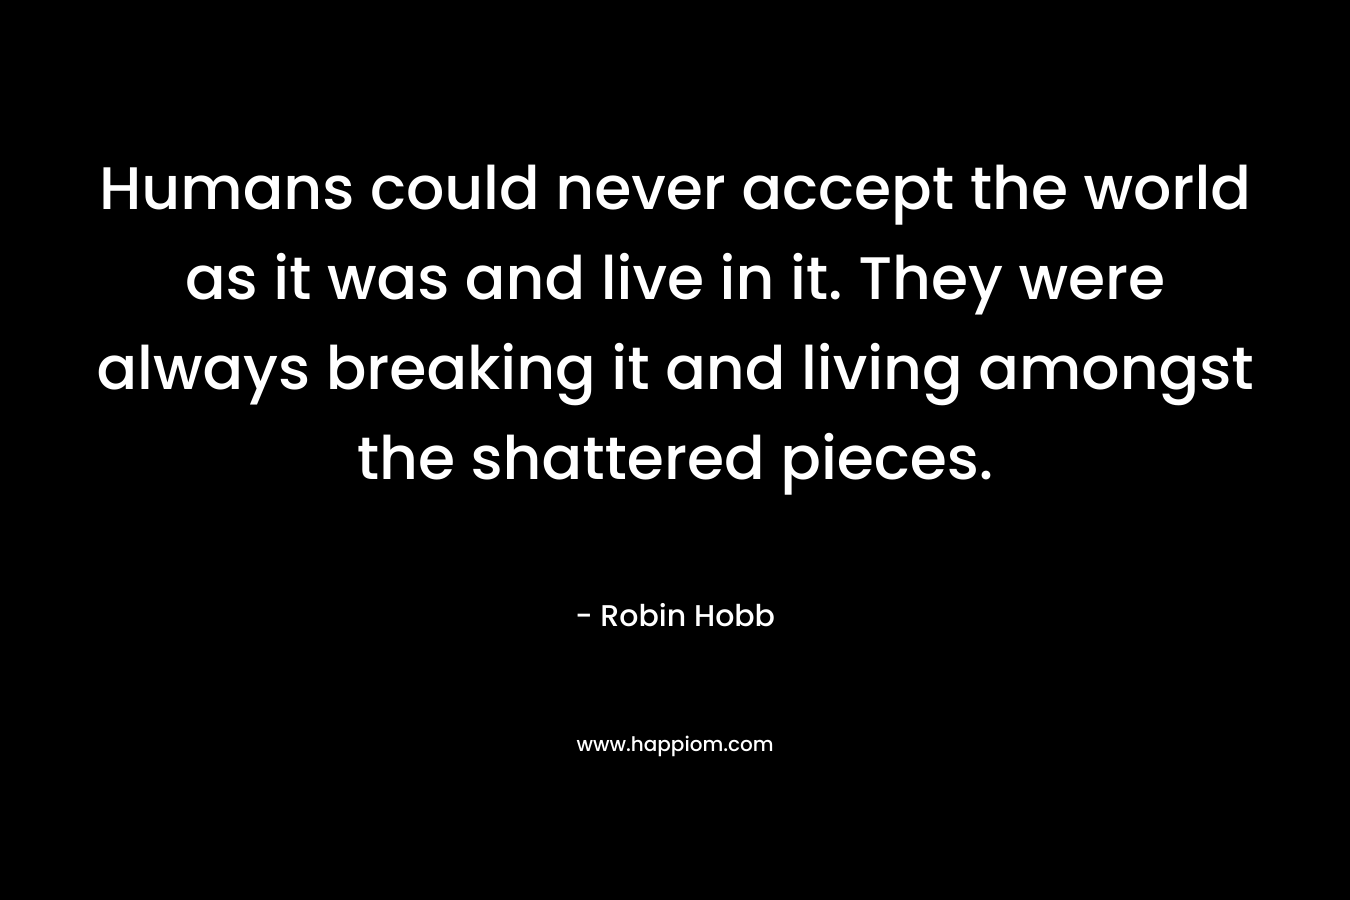 Humans could never accept the world as it was and live in it. They were always breaking it and living amongst the shattered pieces.